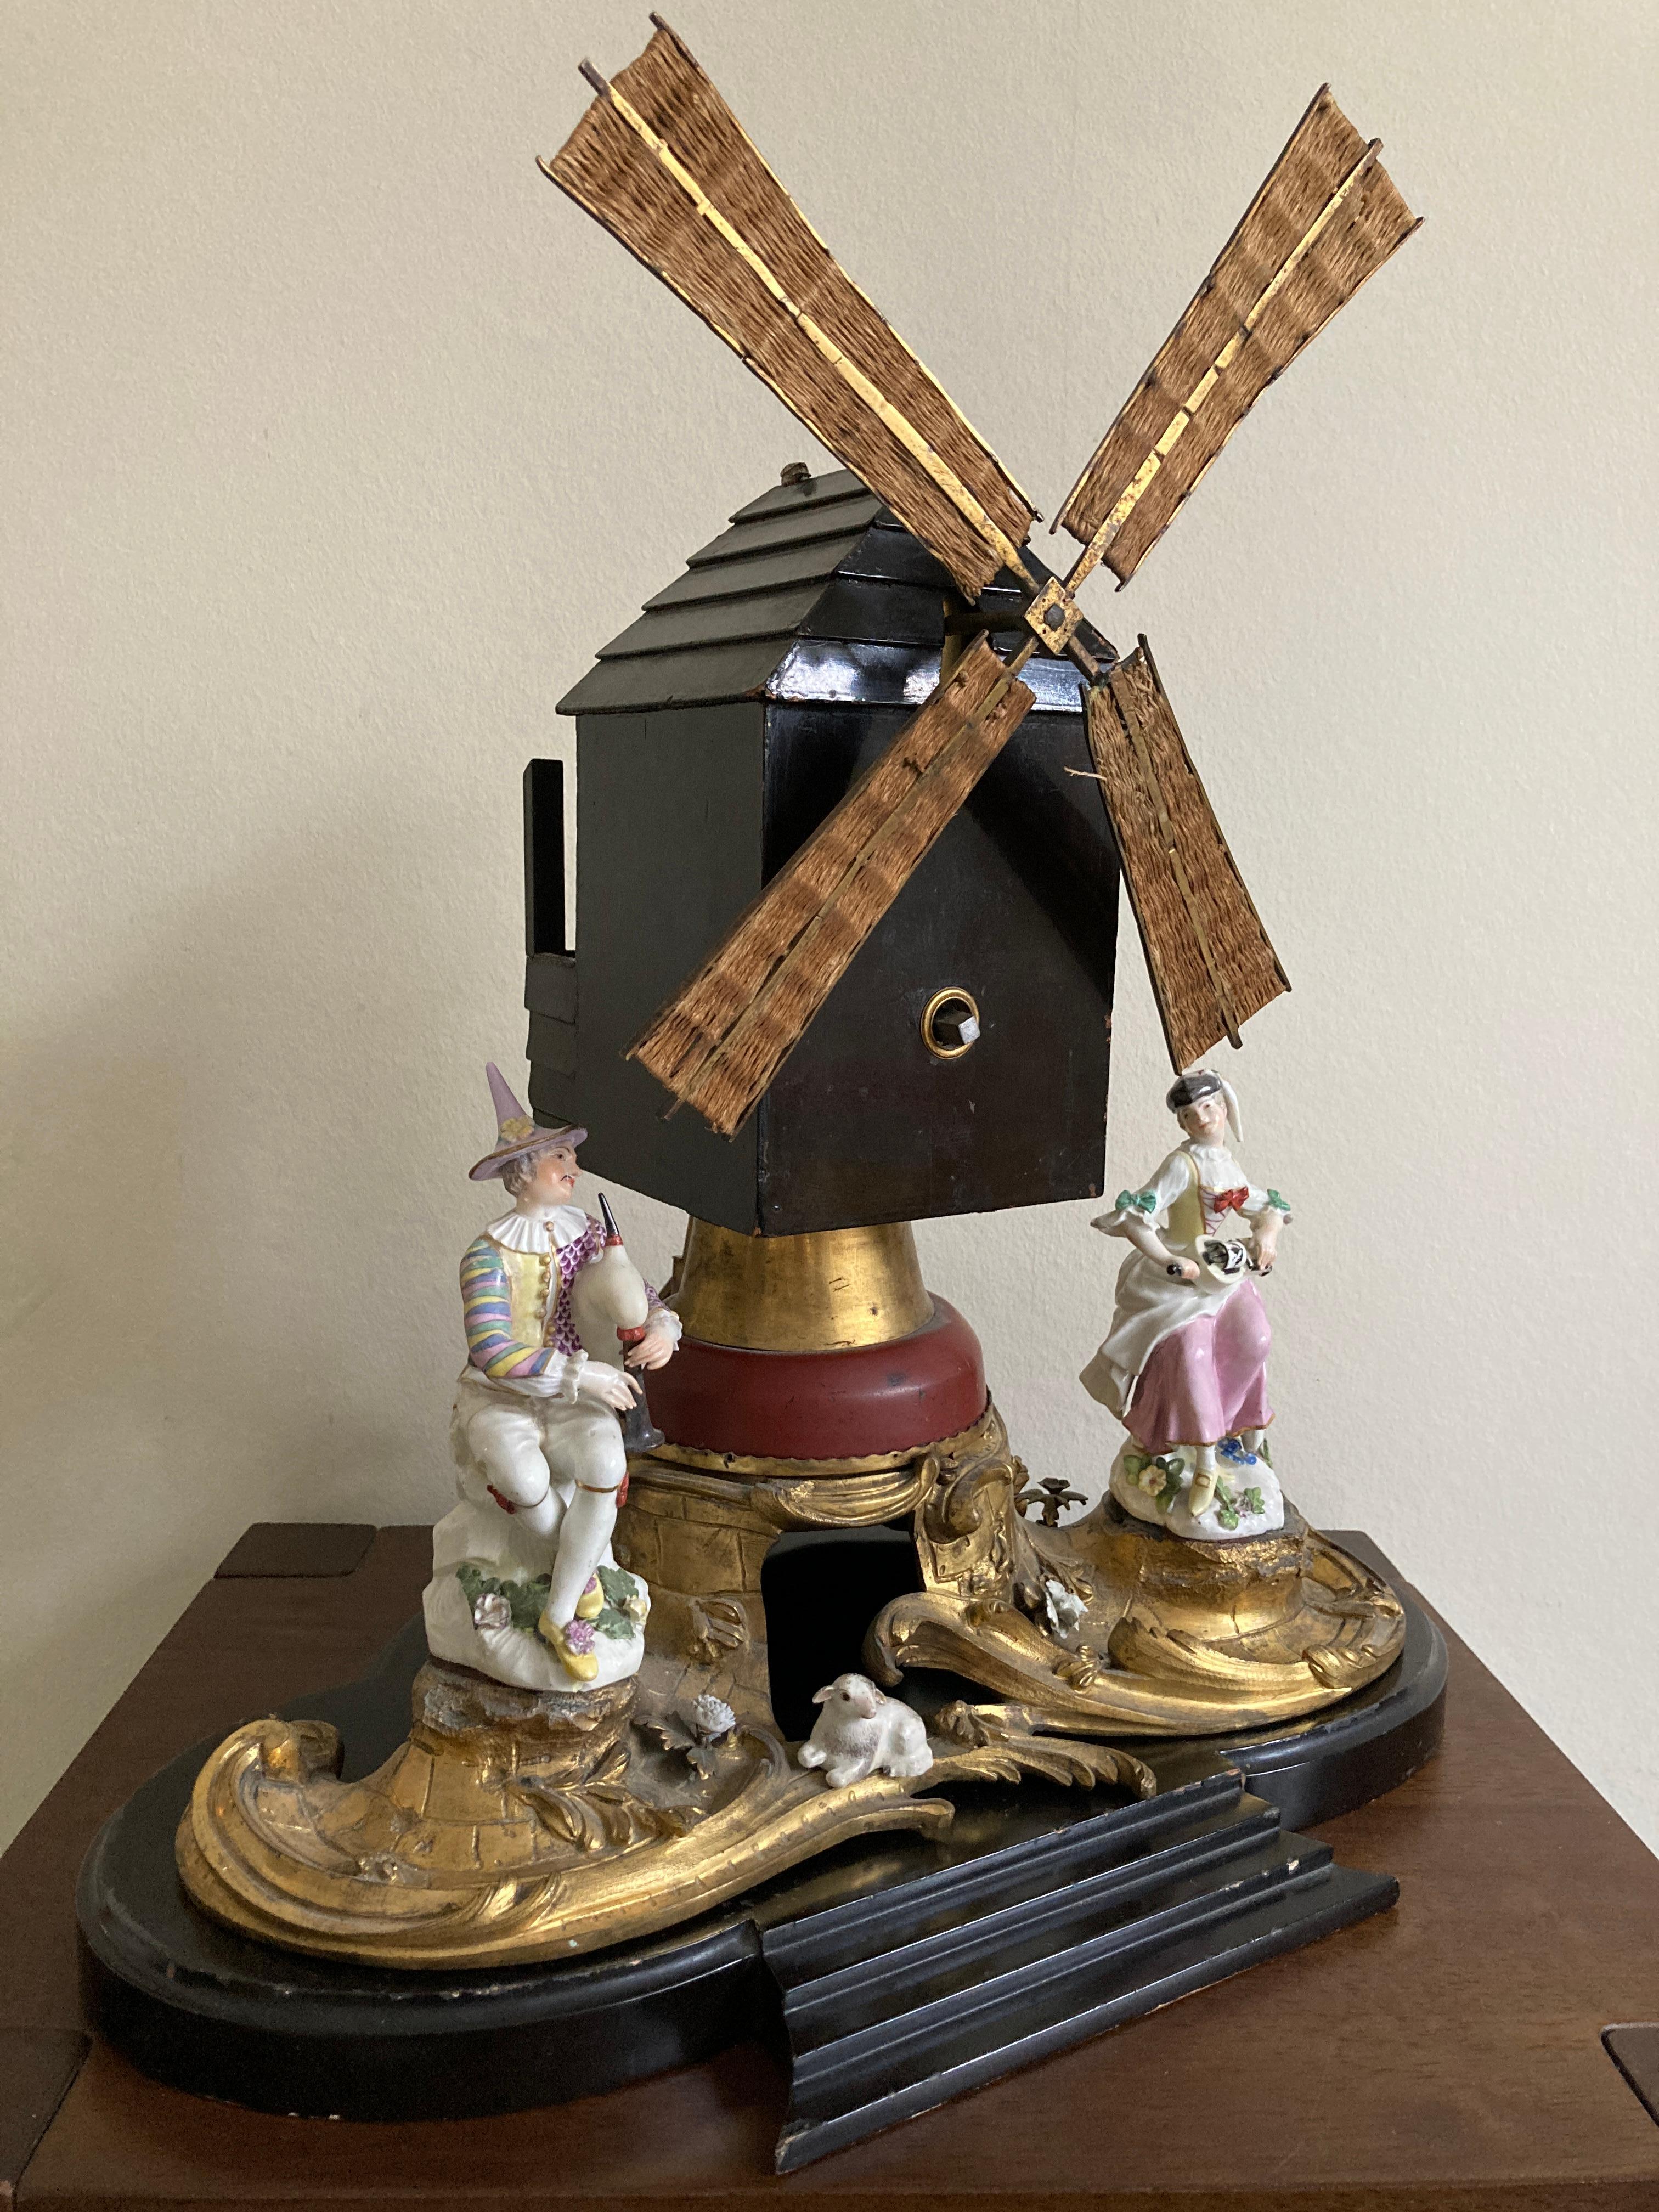 Windmill from the Louis XV period, decorated with 2 Meissen porcelain figures and gilt bronze.

The movement of the mill signed inside ‘Bunon Fecit ParisiSe’ , and likely to be the work of the watchmaker Antoine-Robert Bunon.

The Meissen porcelain